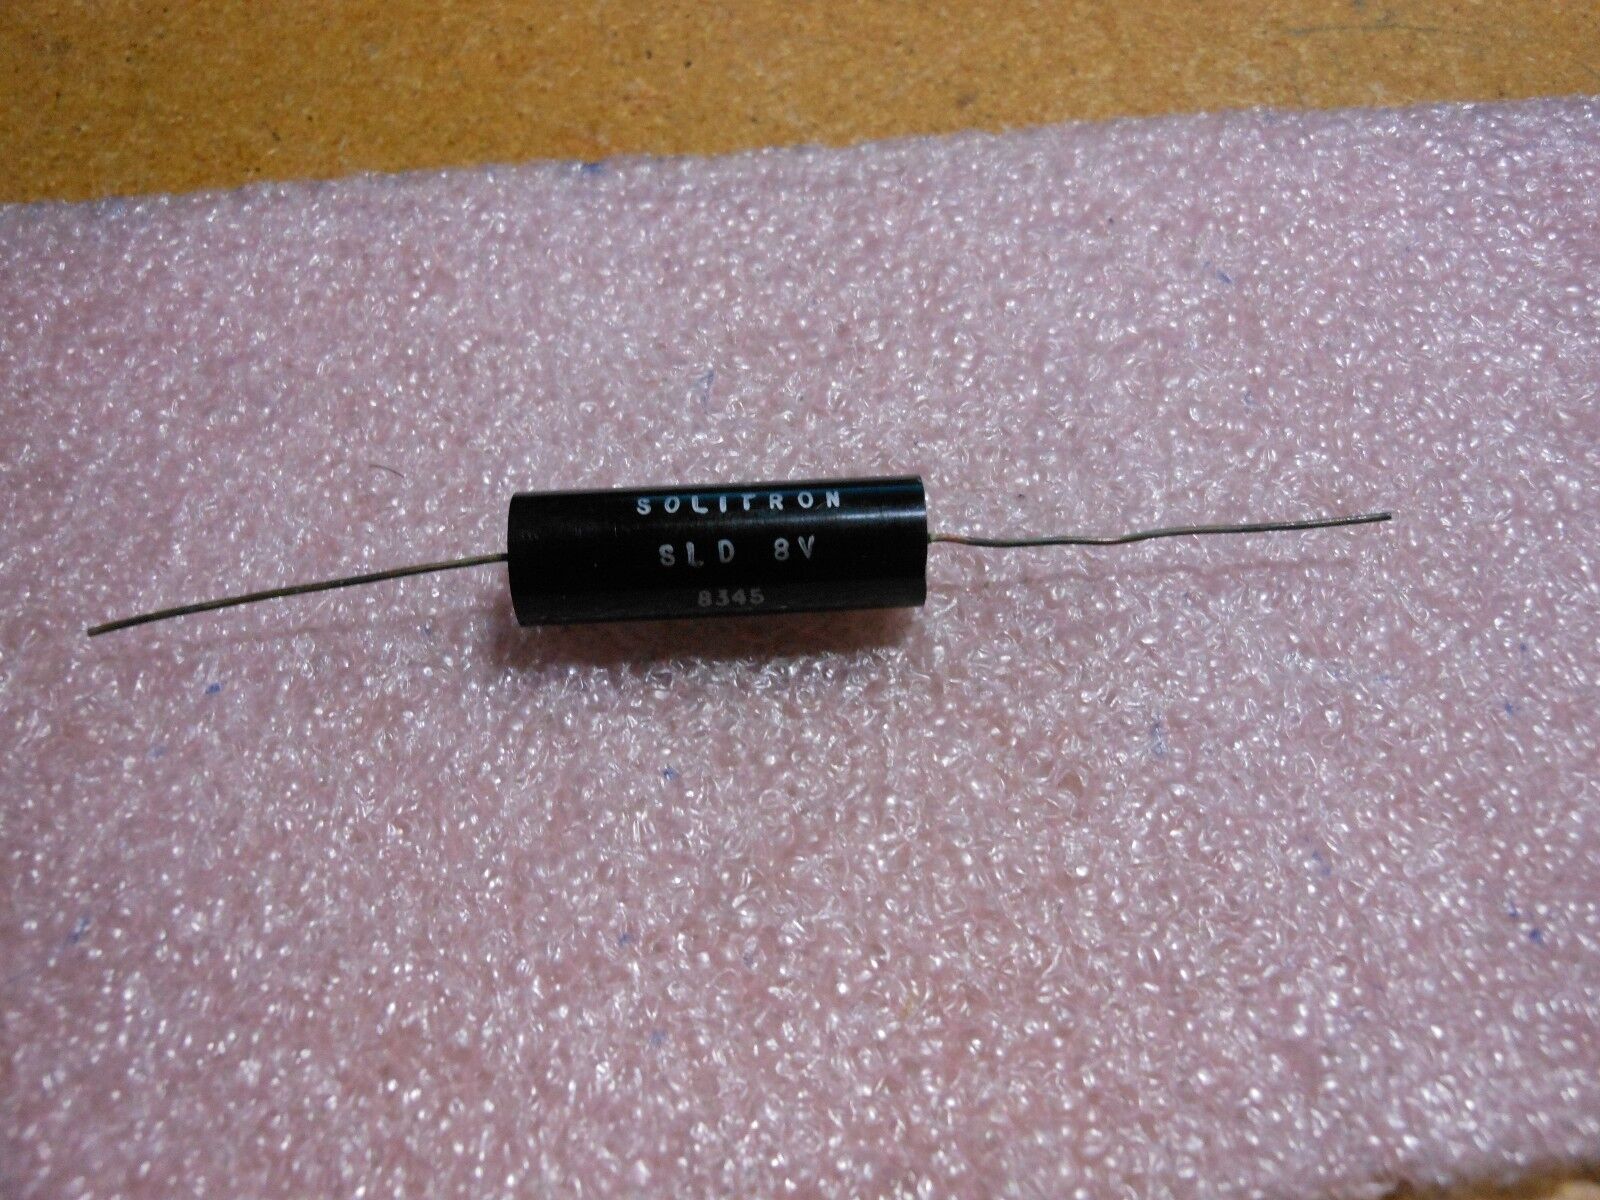 SOLITRON SEMICONDUCTOR DEVICE PART # SLD-8V  NSN: 5961-01-110-6261